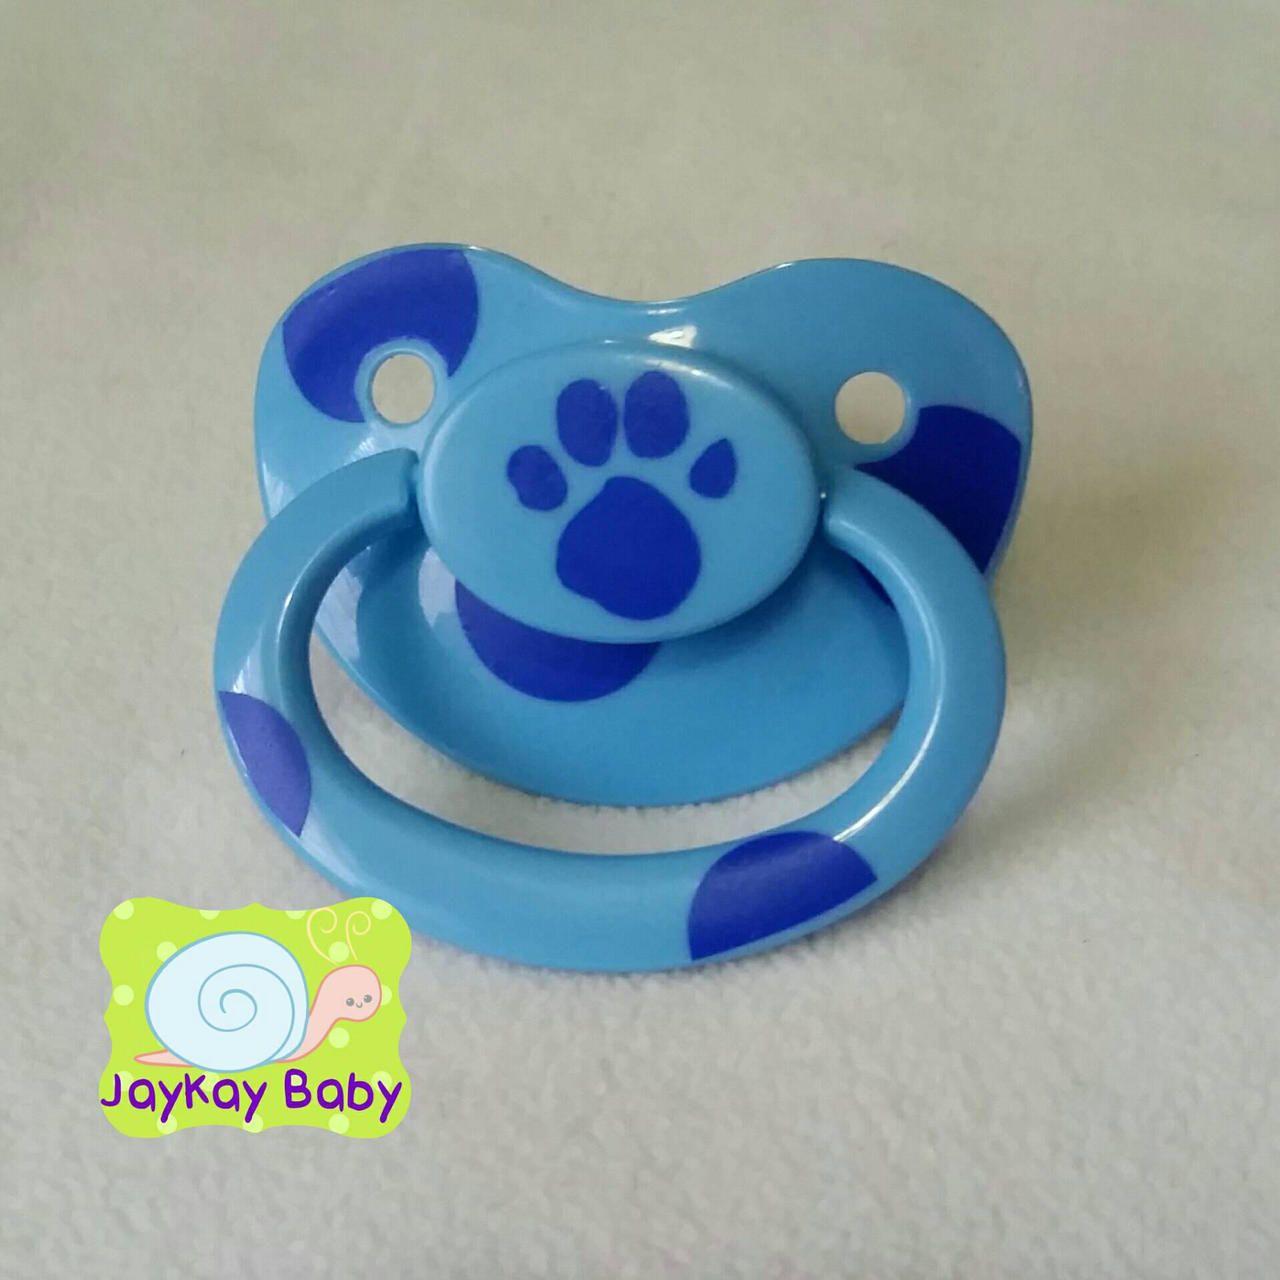 Blue Clue Print Paw Logo - Blue's Clues Paw Print Themed Adult Pacifier